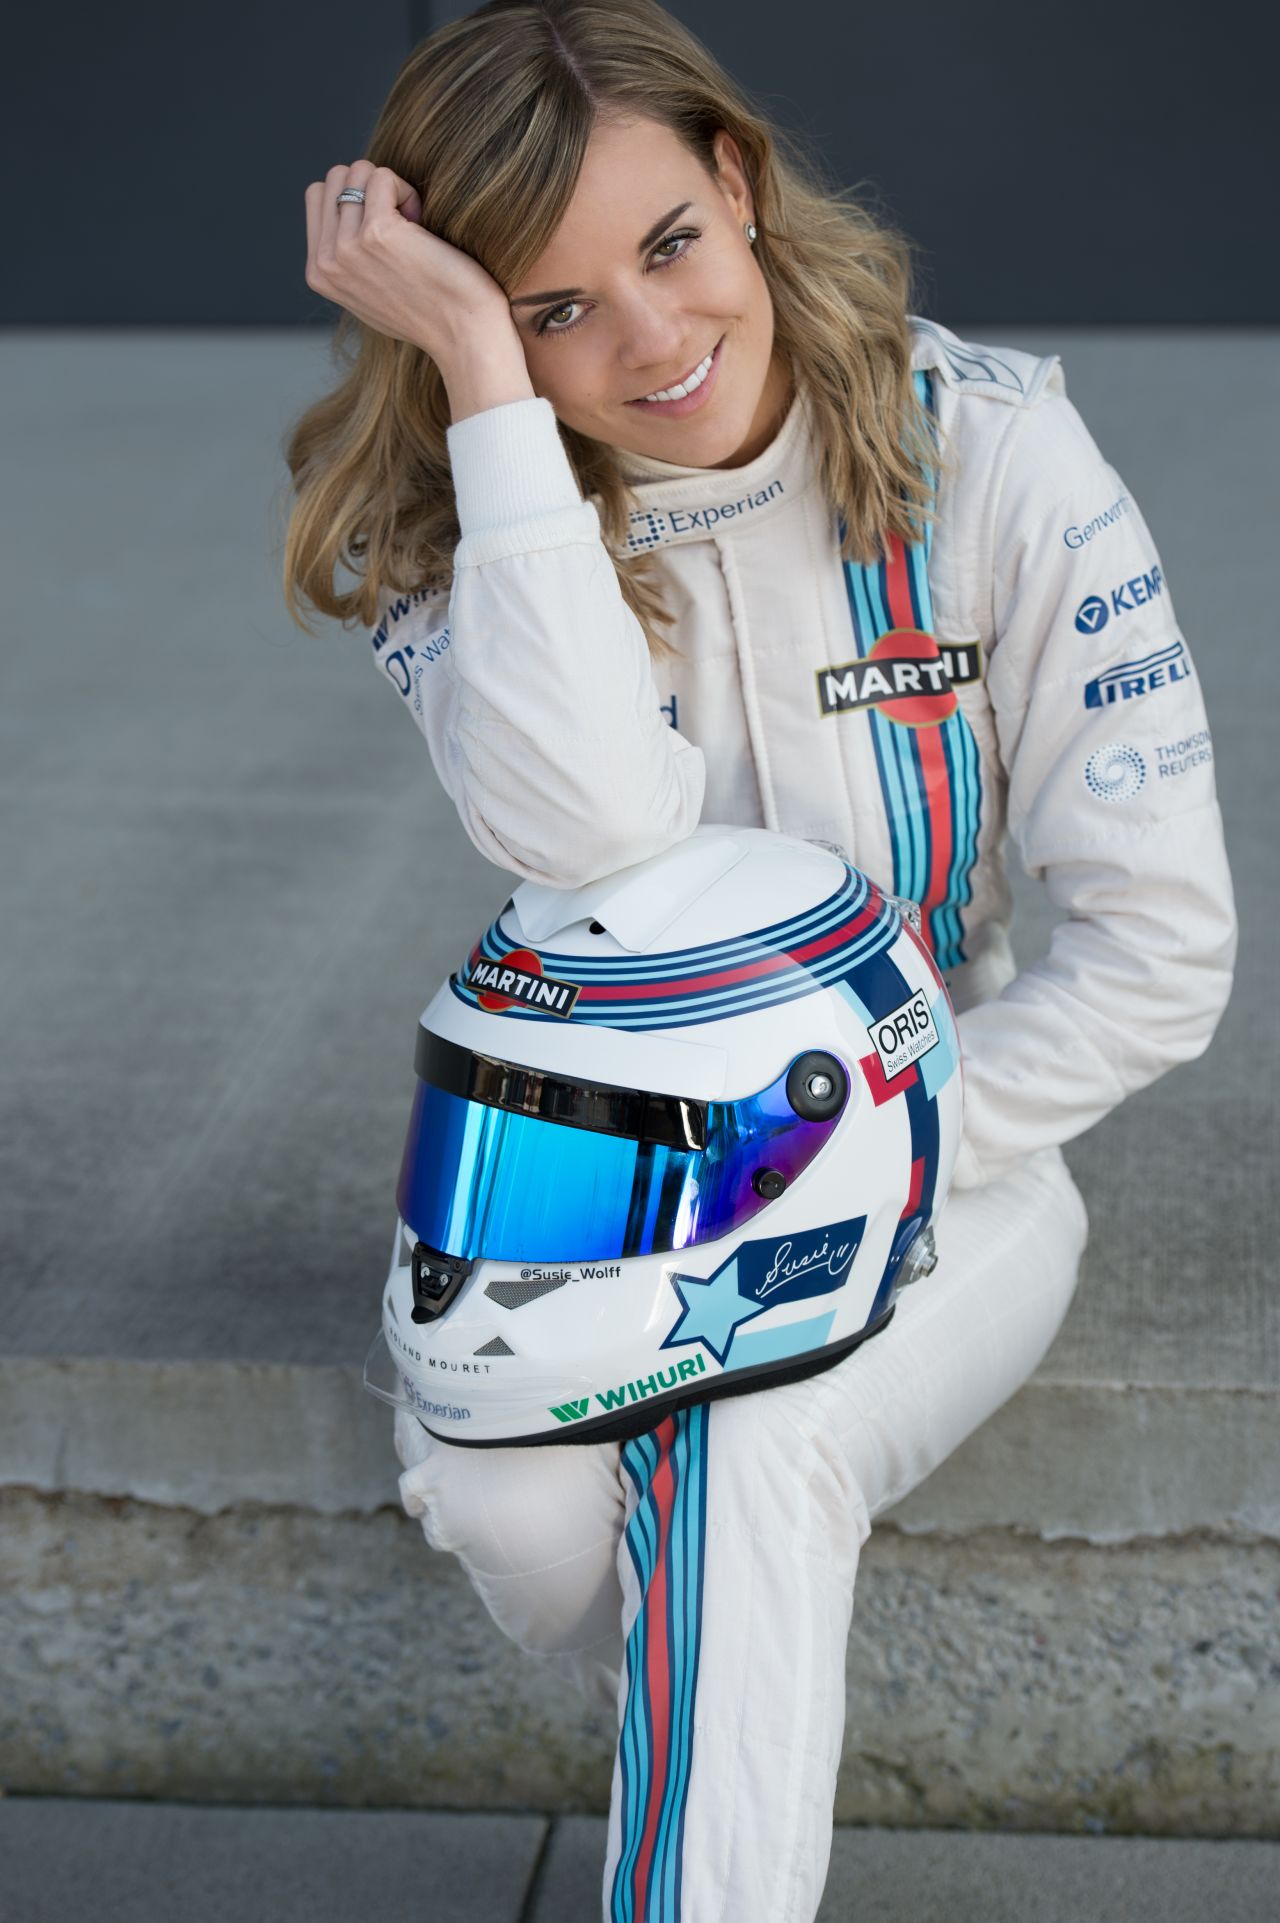 British driver <strong>Susie Wolff</strong> became Formula One's first female competitor in 20 years when she took part in <a href="https://www.cnn.com/2014/04/18/motorsport/gallery/susie-wolff-formula-one-williams/Susie%20Wolff%20will%20become%20the%20Formula%20One%27s%20first%20female%20competitor%20in%2020%20years%20when%20she%20takes%20part%20in%20the%20first%20practice%20sessions%20at%20the%20British%20and%20German%20grands%20prix%20in%20July." target="_blank">the first practice sessions at the British Grand Prix</a>. But in 2015 she announced her retirement from the sport saying her dream of making it into the starting grid "isn't going to happen."